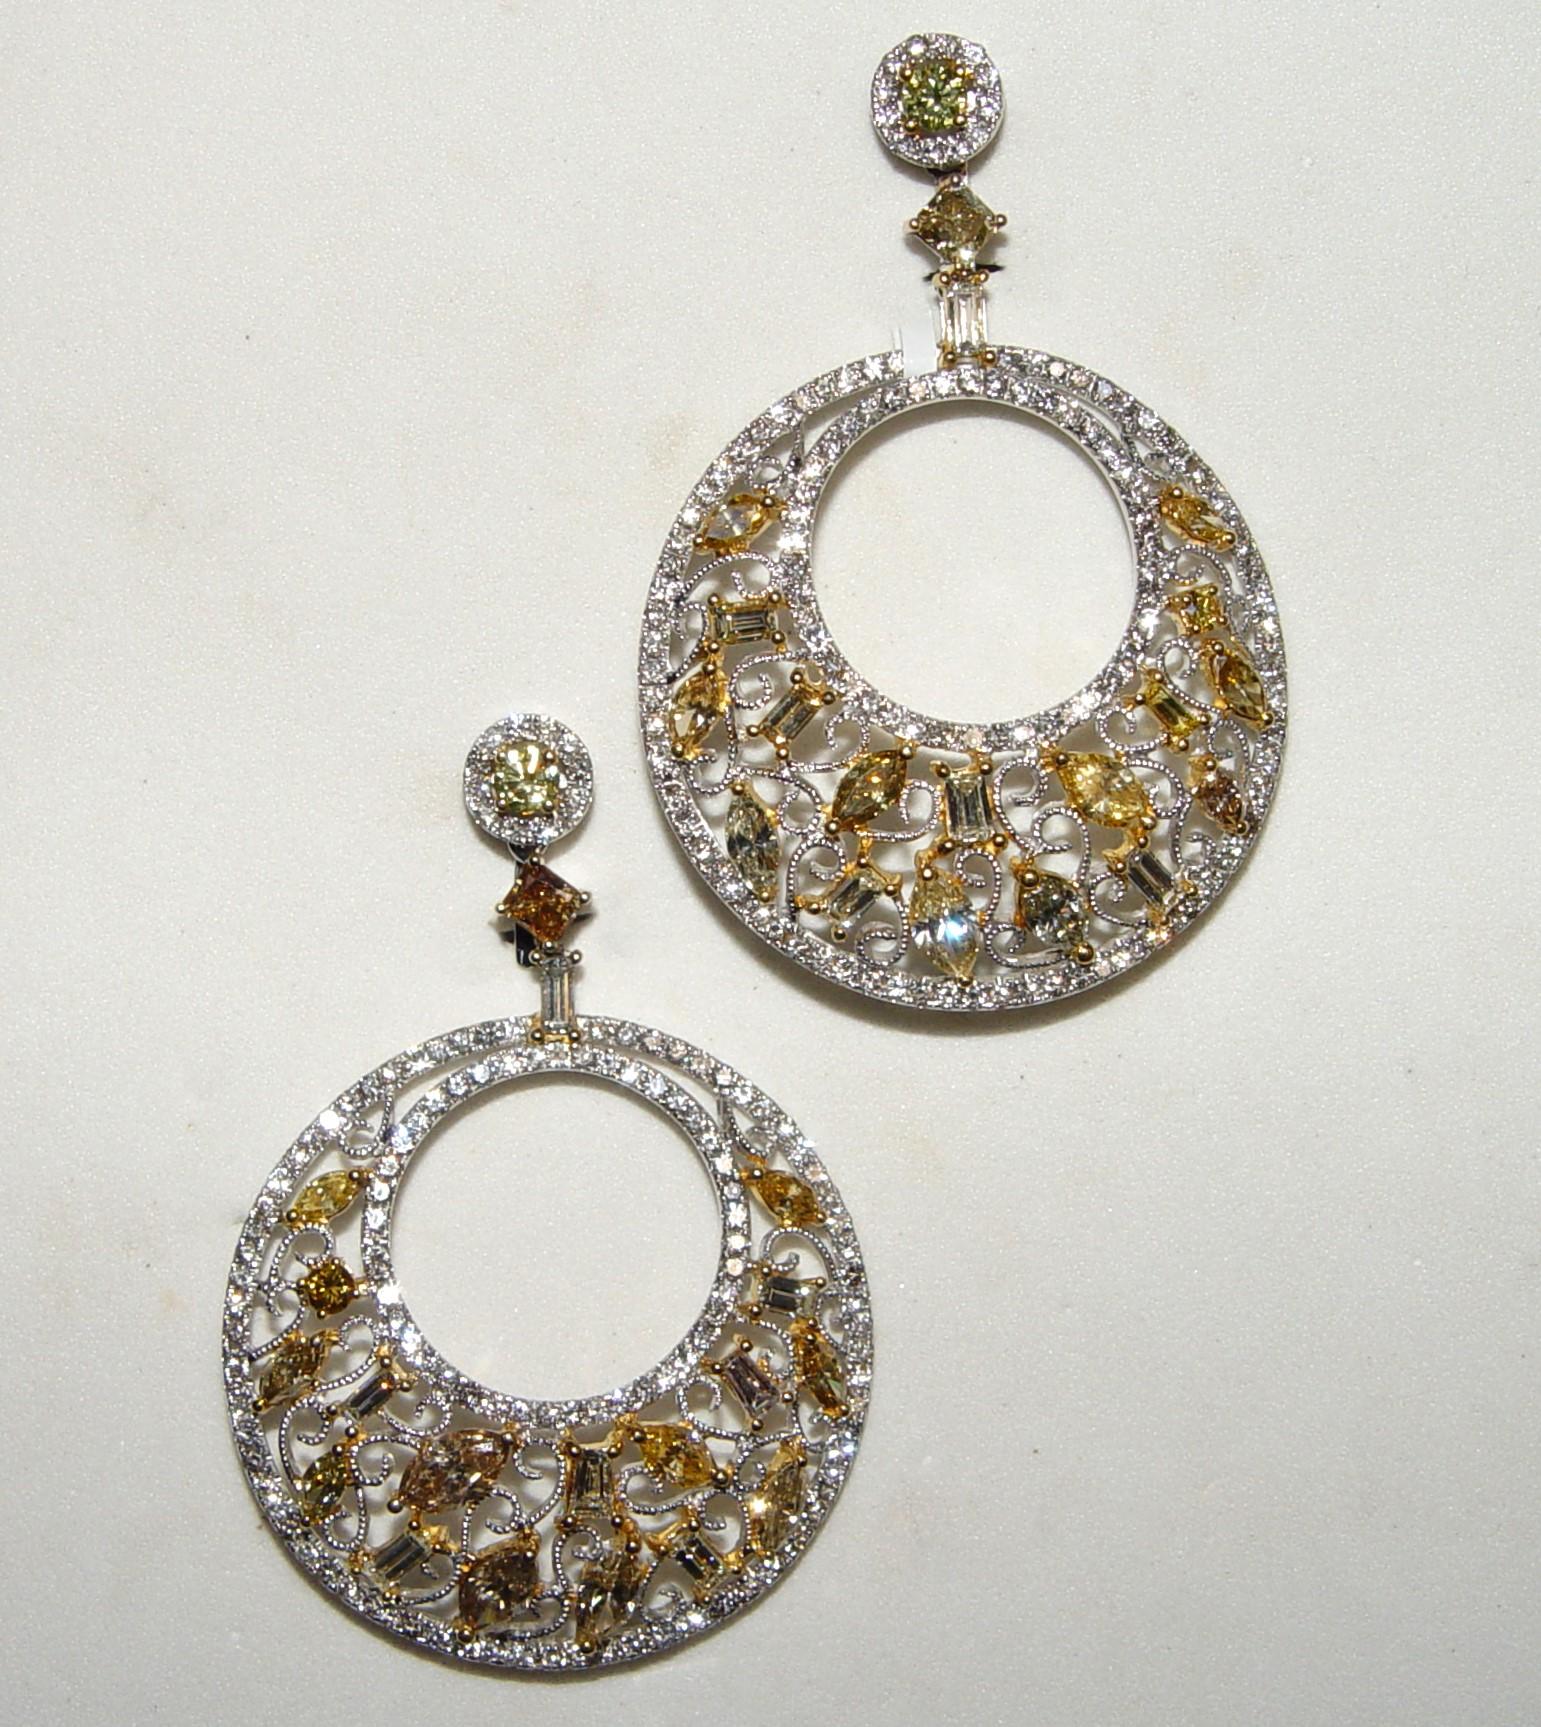 Two chandelier earring encrusted with 256 Round brilliant cut natural WHITE diamond 3.23CT total in for two earrings (diamonds are beautiful G-H in color or better, VS-SI1 or better - white and sparkly stones). Dangling part of each earring set with